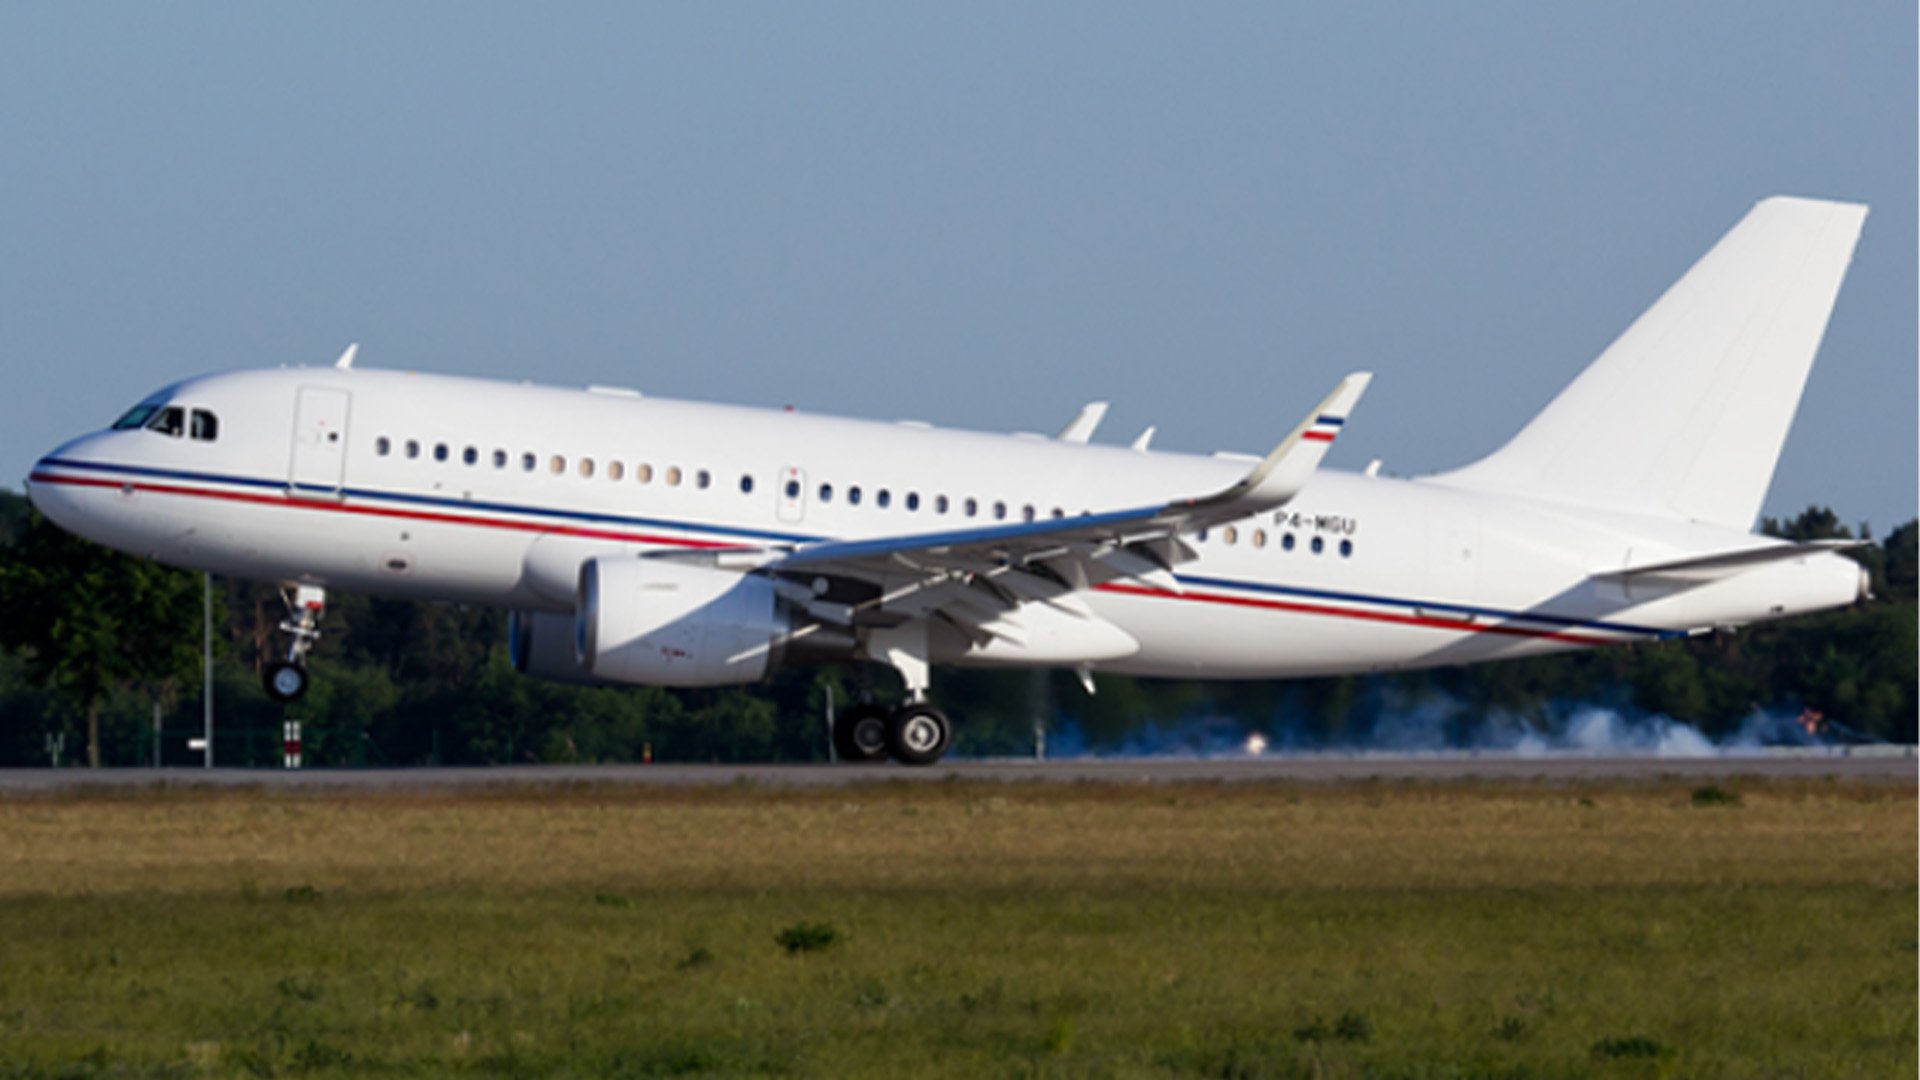 On Monday, Aug. 8, 2022, US authorities in New York obtained a warrant to seize an Airbus A319-100 owned by Russian oligarch Andrei Vladimirovich Skoch, a billionaire steelmaker who serves in the federation’s State Duma. US Department of Justice photo.